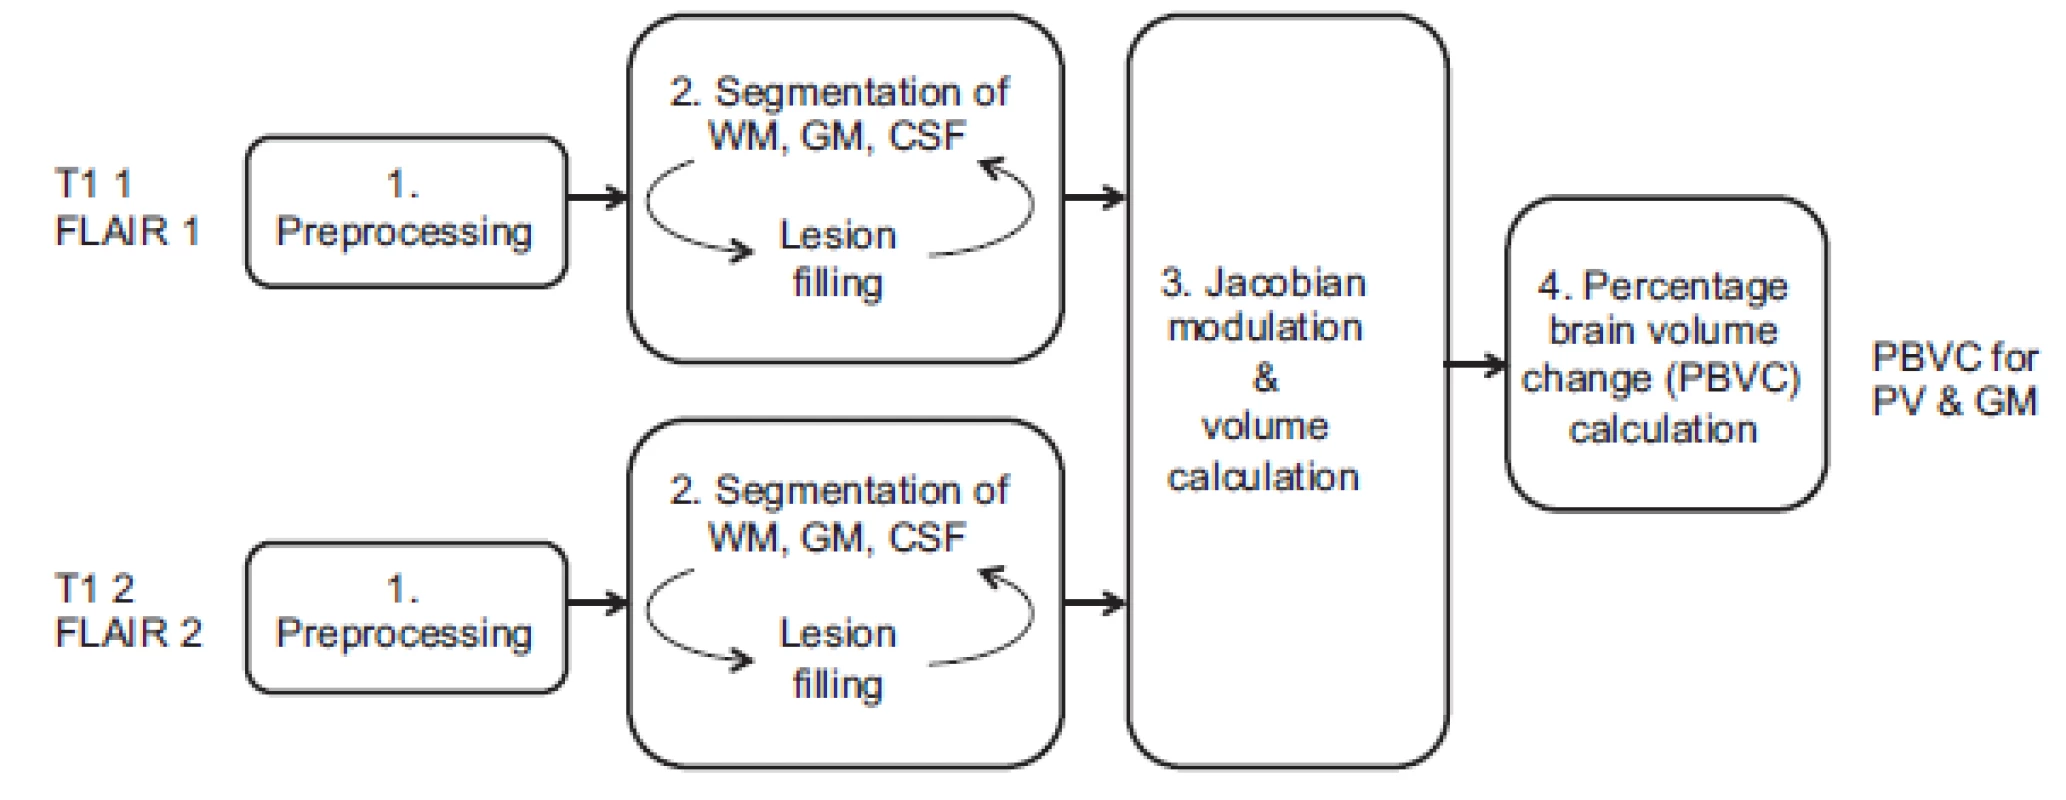 Schematic representation of MSmetrix, where the T1 and FLAIR of the two scan sessions that need to be compared are first preprocessed. Based on the preprocessed images, the segmentation of WM, GM and CSF is performed together with lesion filling in the second step. The third step is to calculate the volumes and perform the Jacobian modulation and only in the fourth step the actual PBVC is obtained.